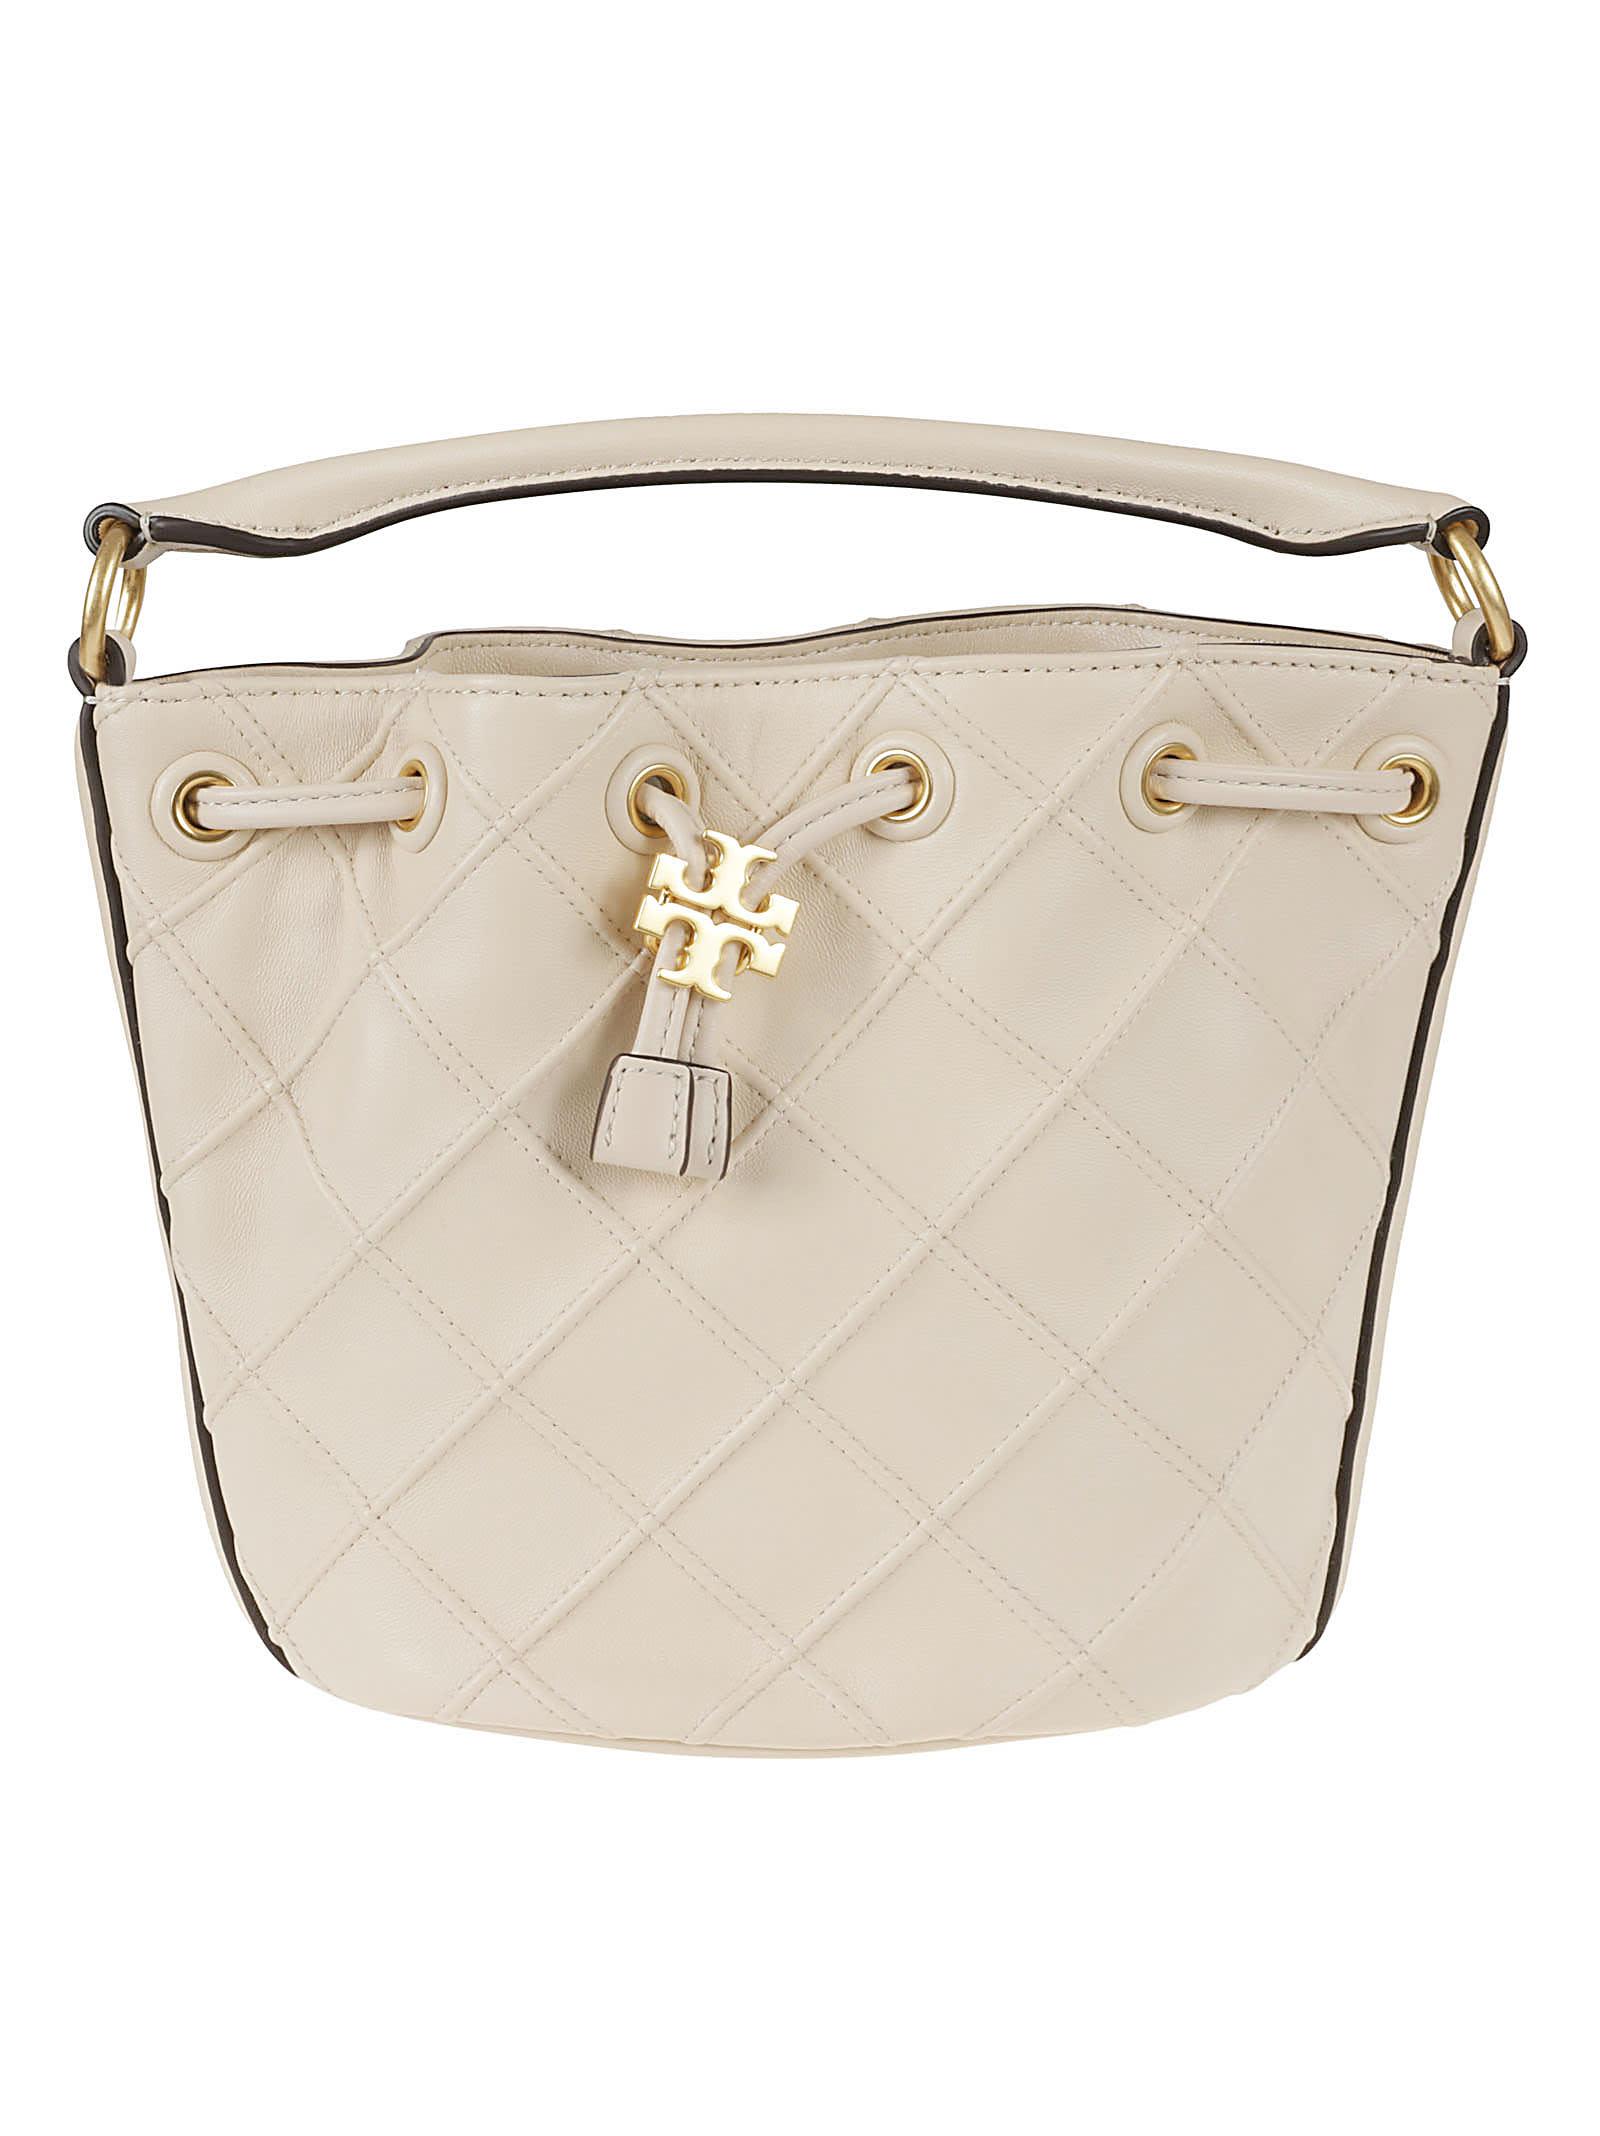 Tory Burch Fleming Soft Bucket Bag in Natural